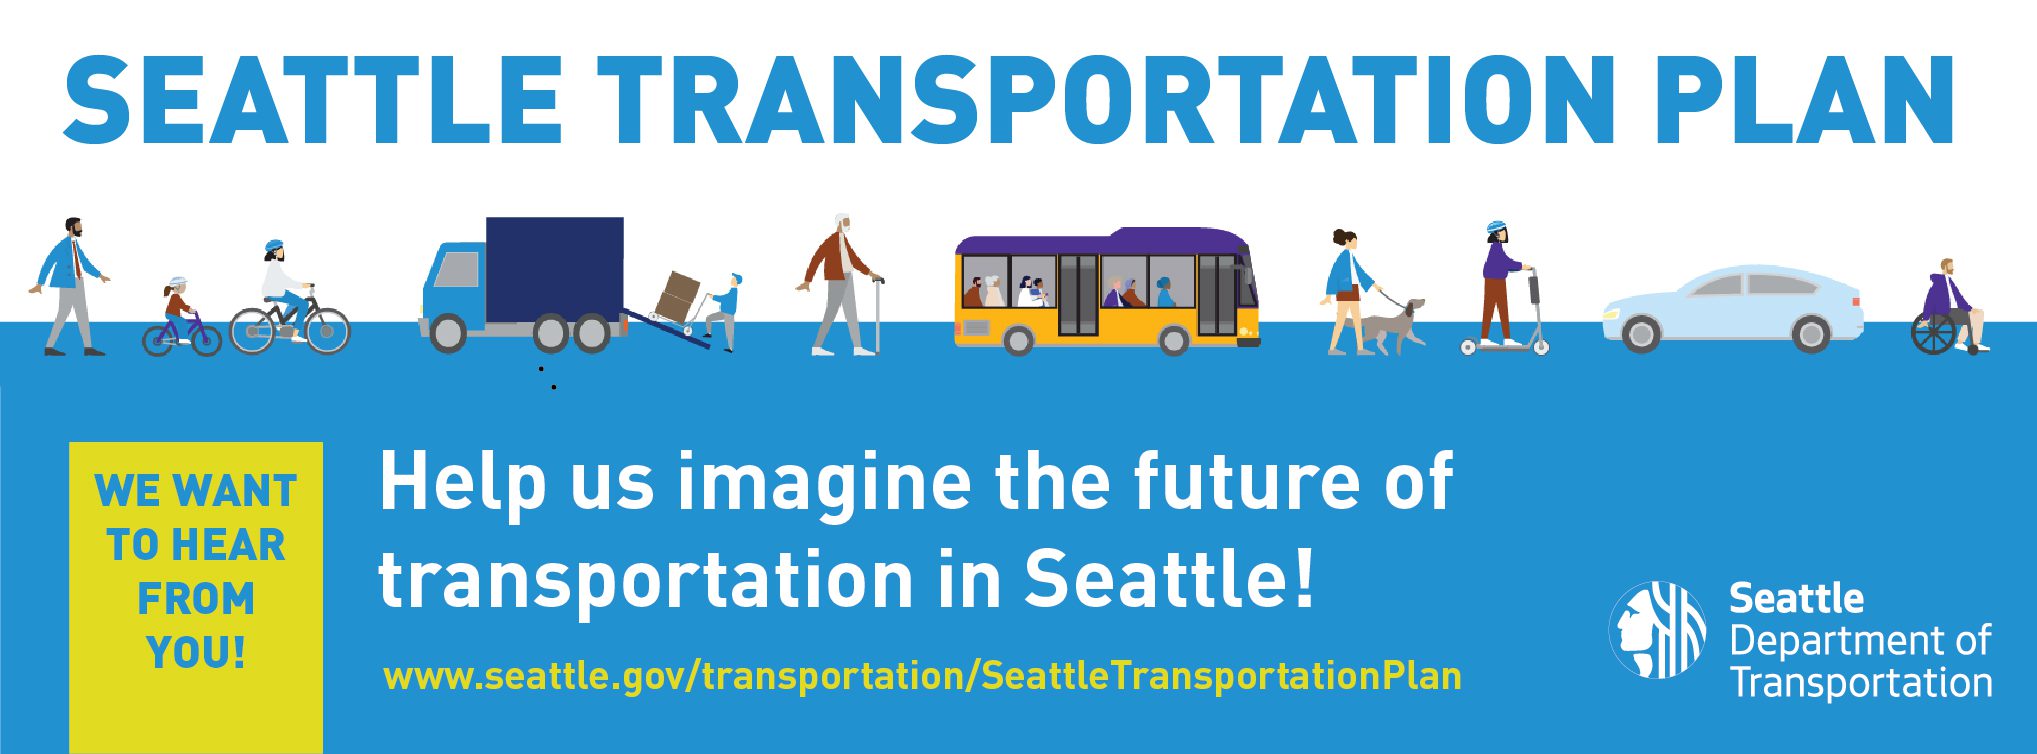 The Seattle Transportation Plan. We want to hear from you! Help us imagine the future of transportation in Seattle at www.seattle.gov/transportation/SeattleTransportationPlan